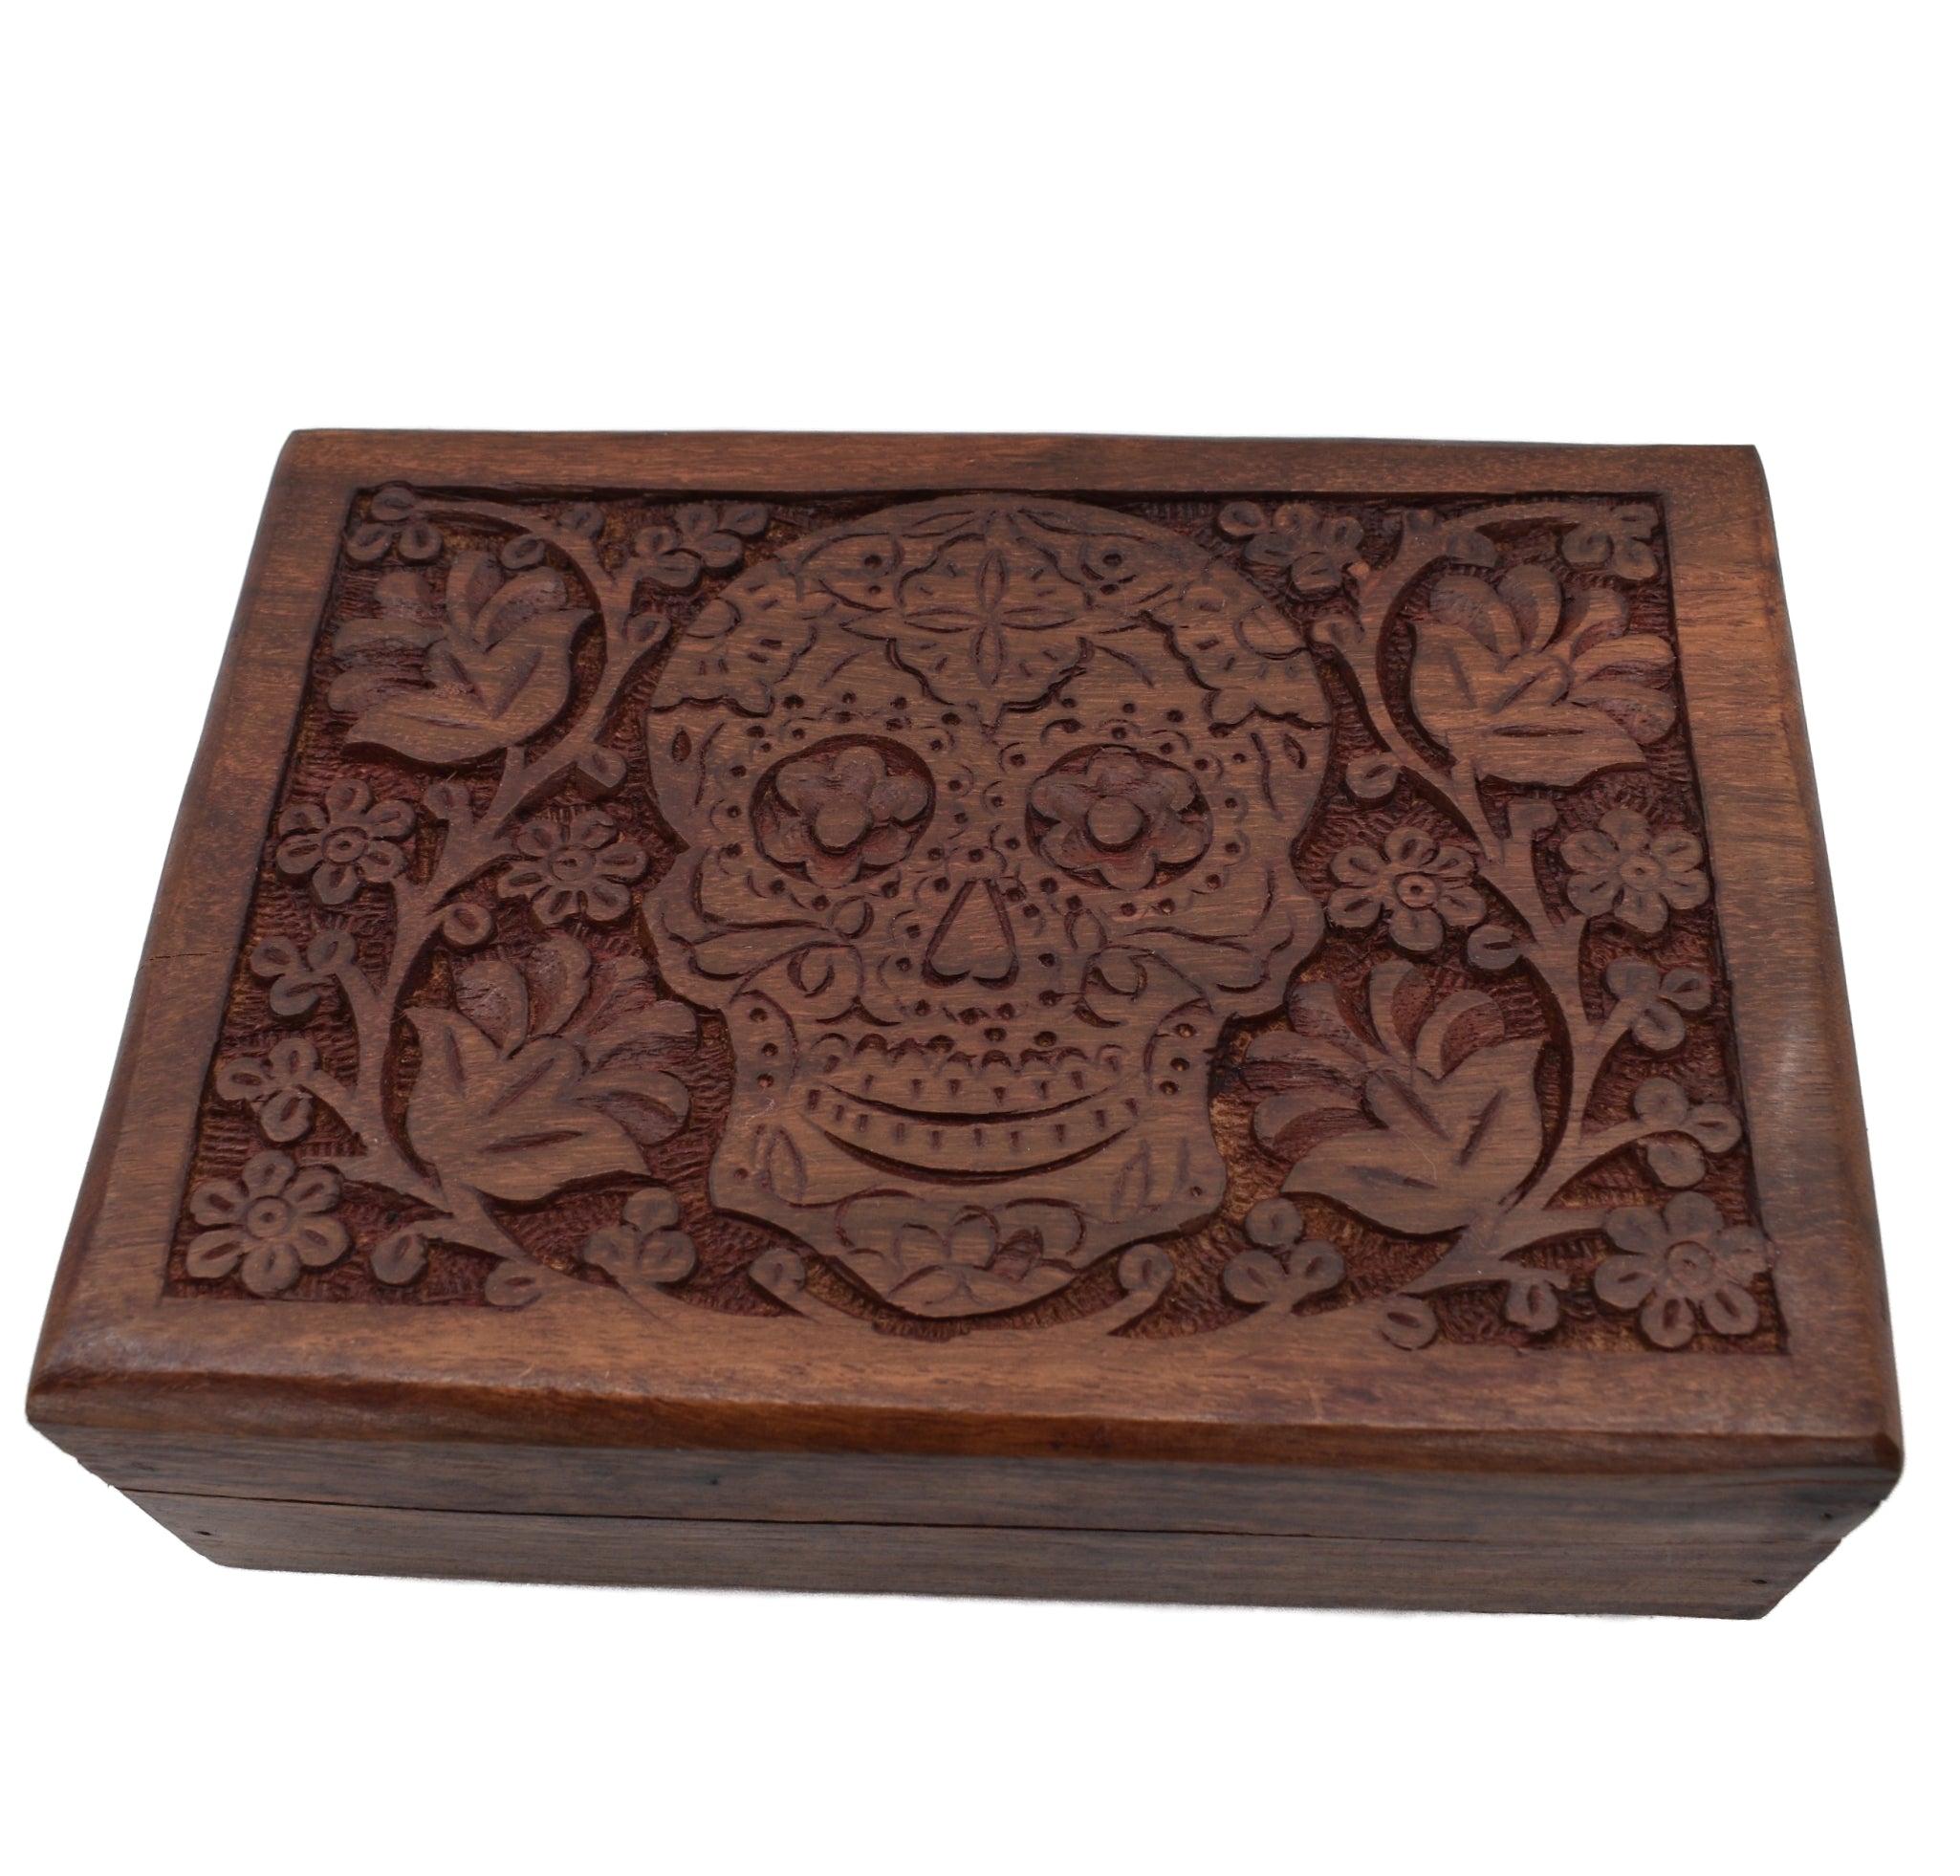 dark wood box carved flowers and skull in middle 